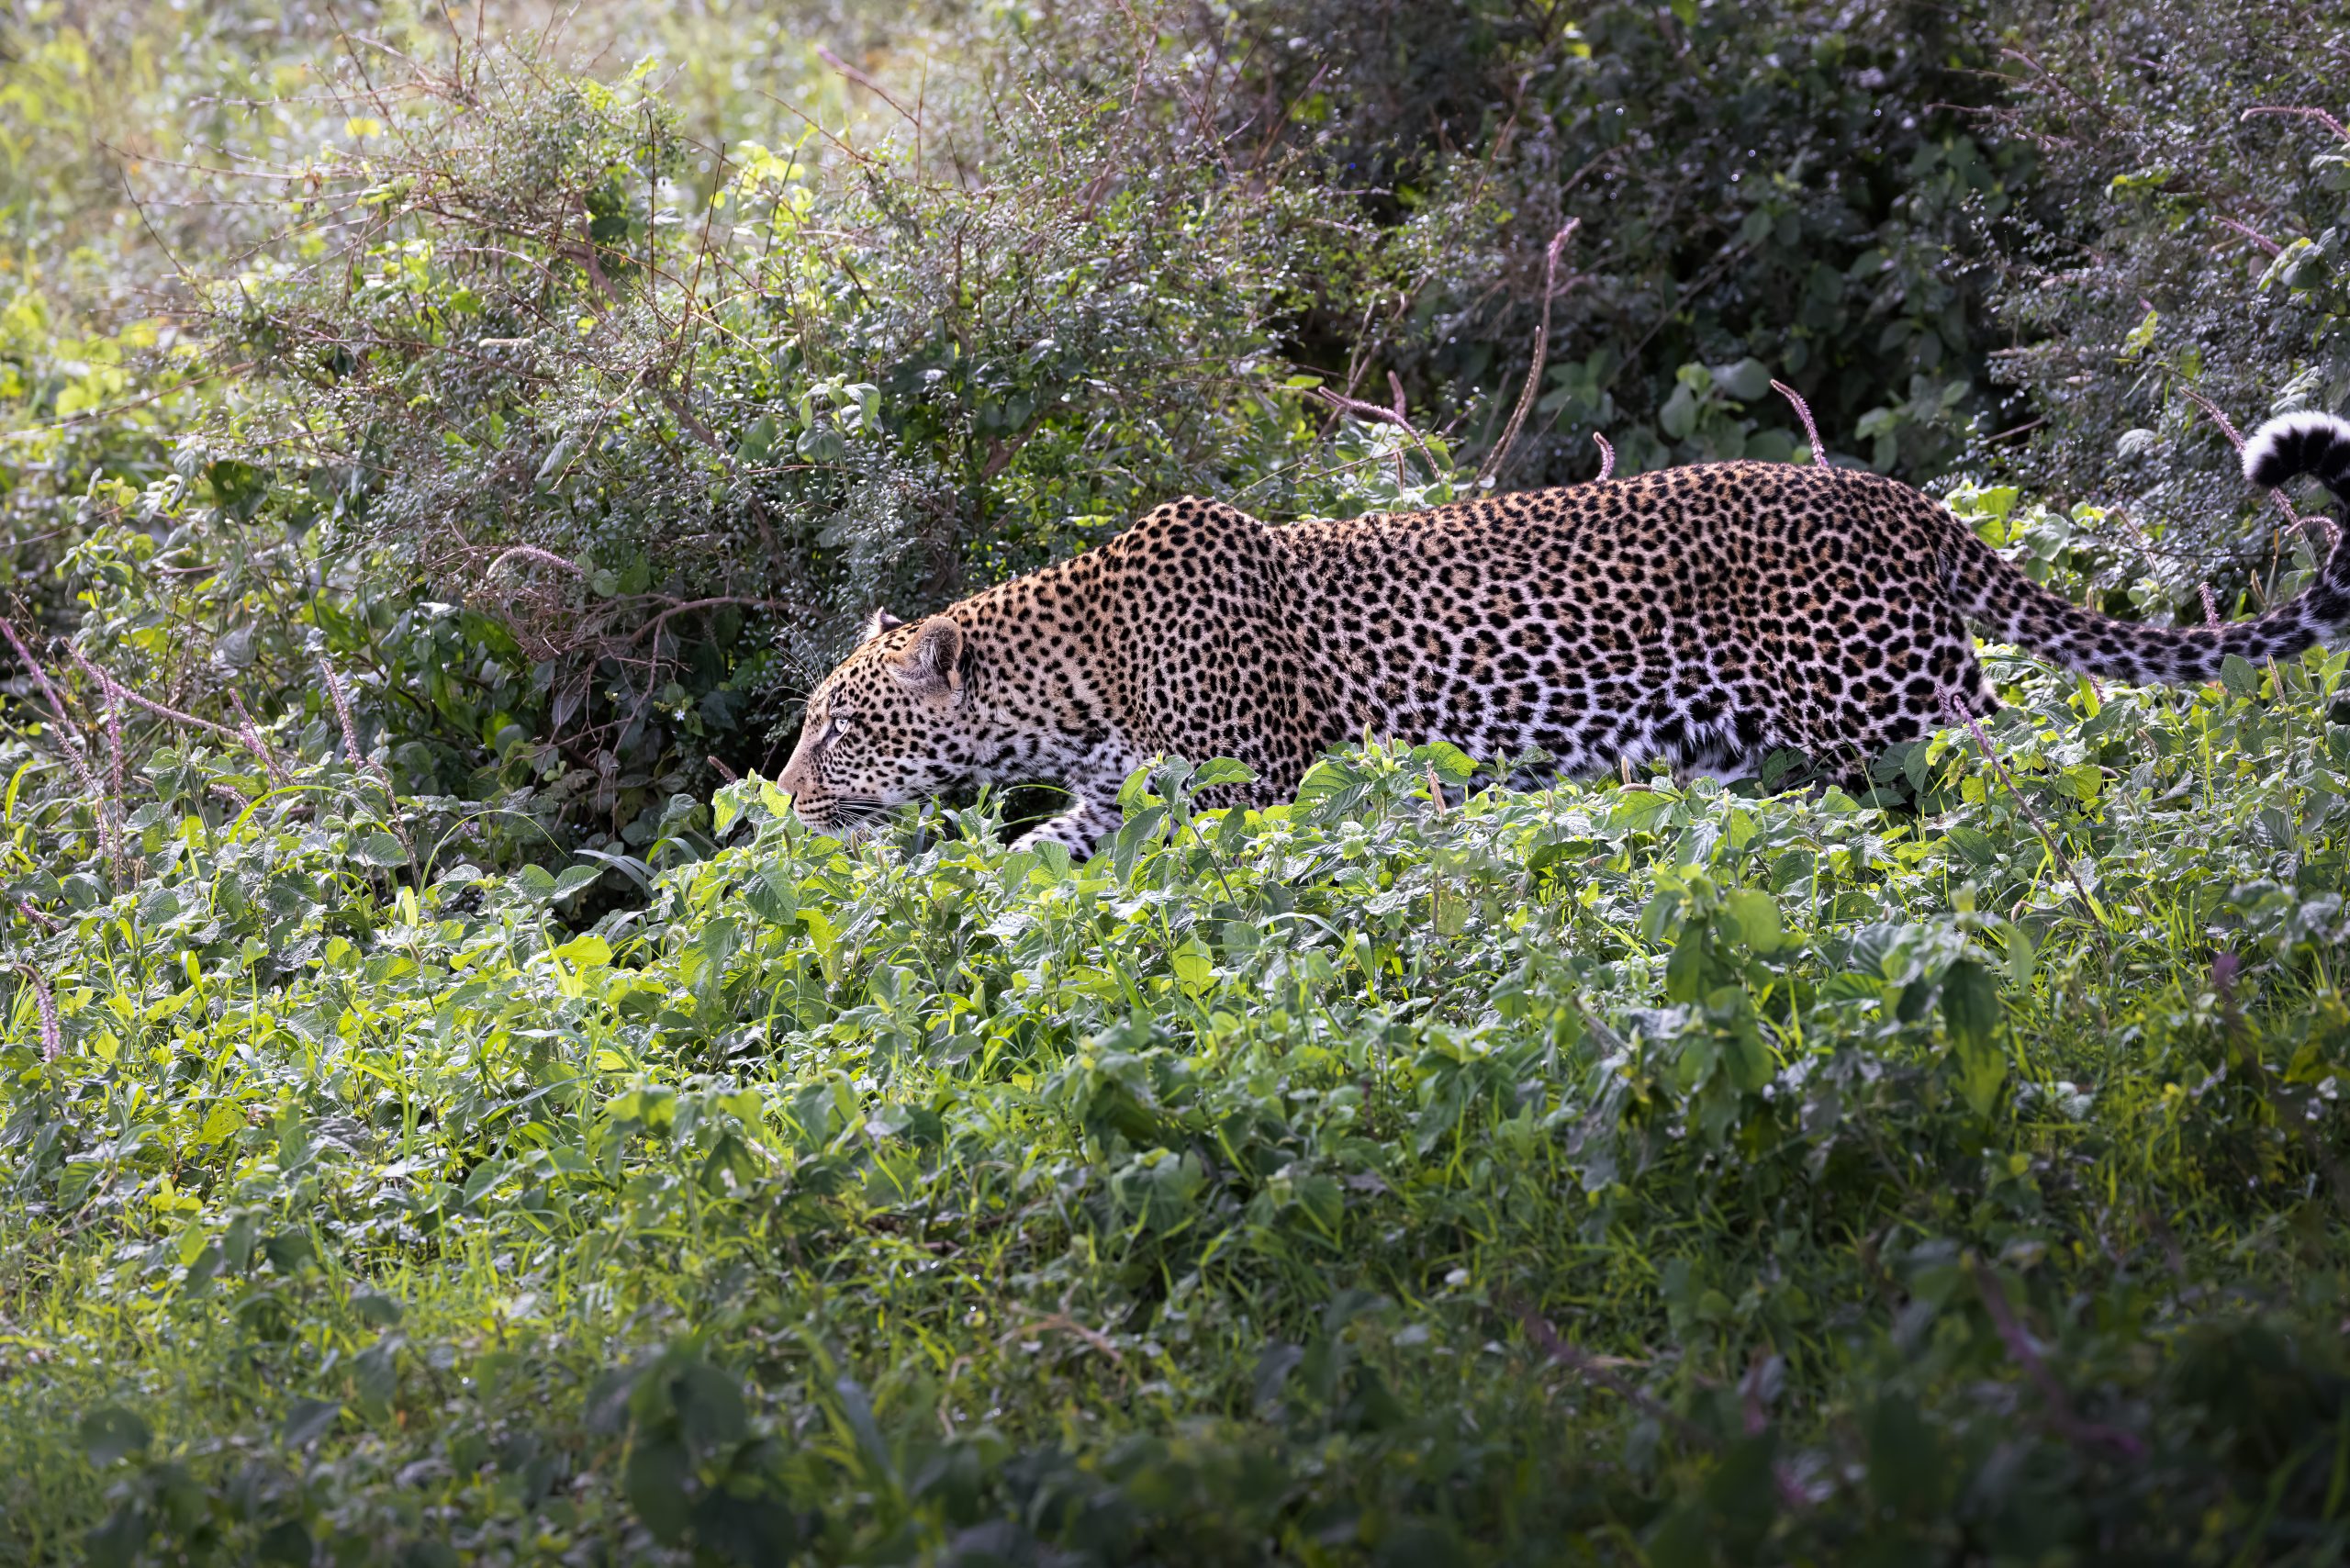 Wild Leopard in the bush of the Serengeti National Park, Tanzania, Africa